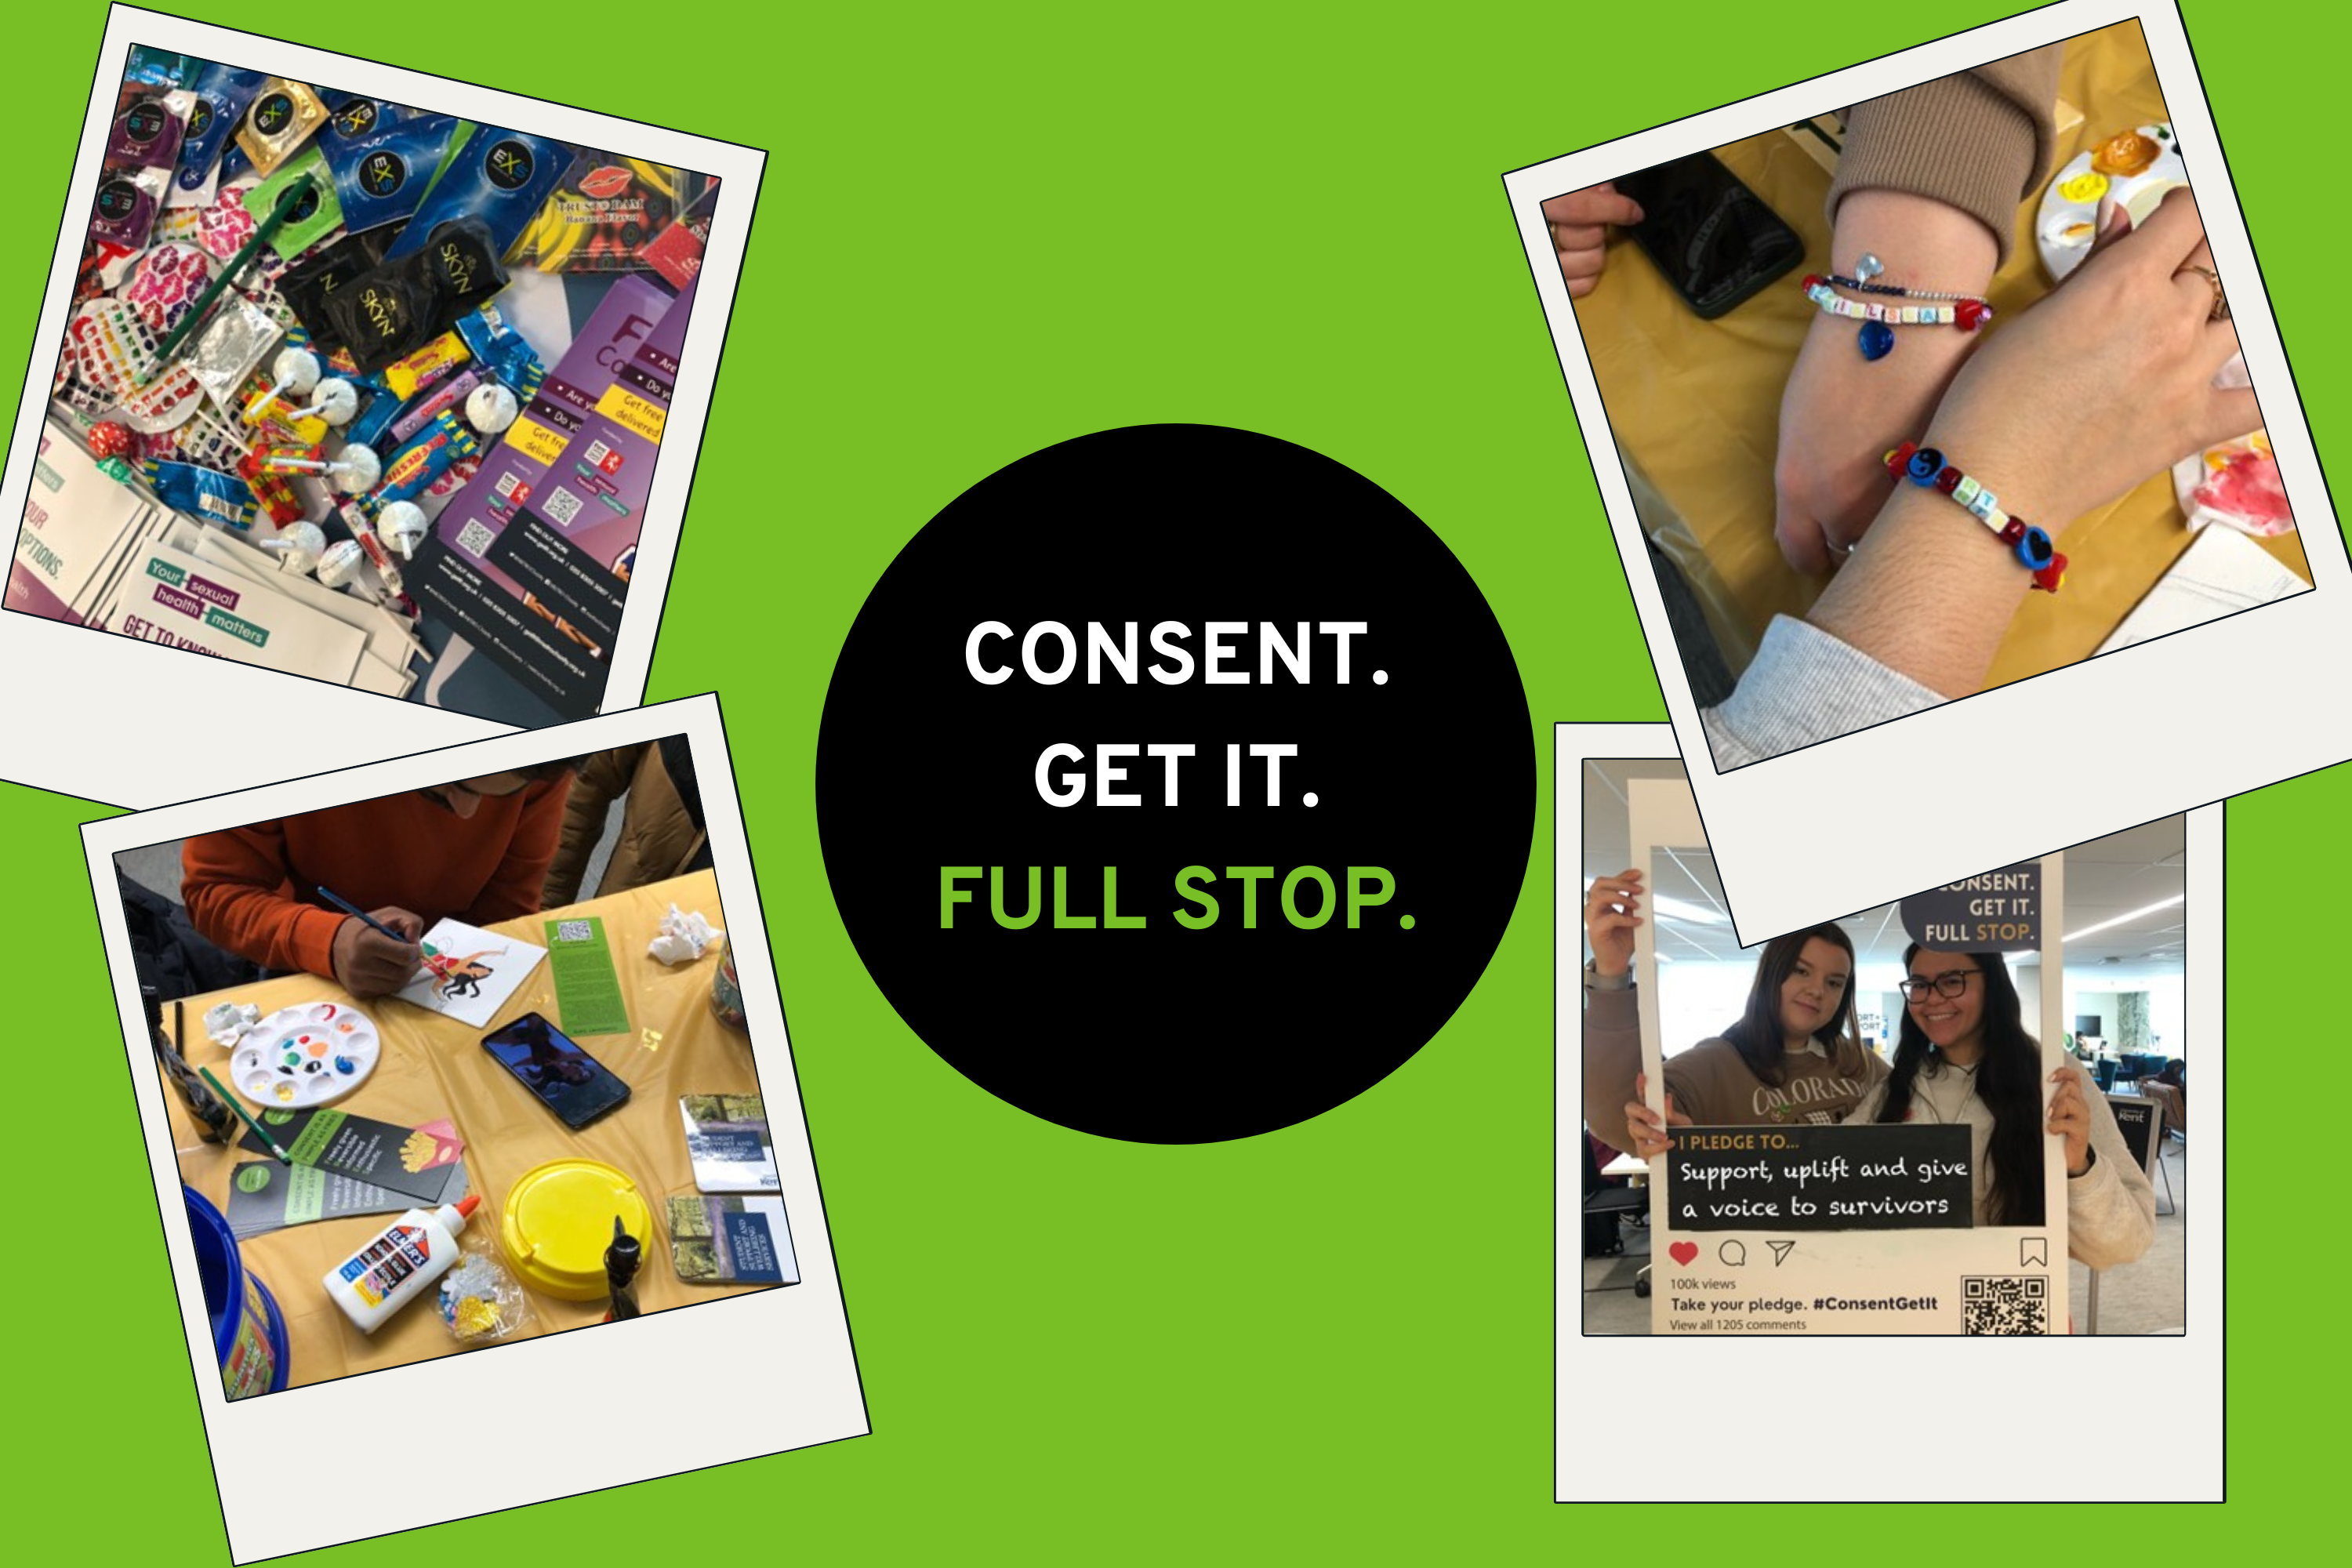 Collage of images from a craft event surrounding a logo reading 'Consent. Get it. Full stop.'